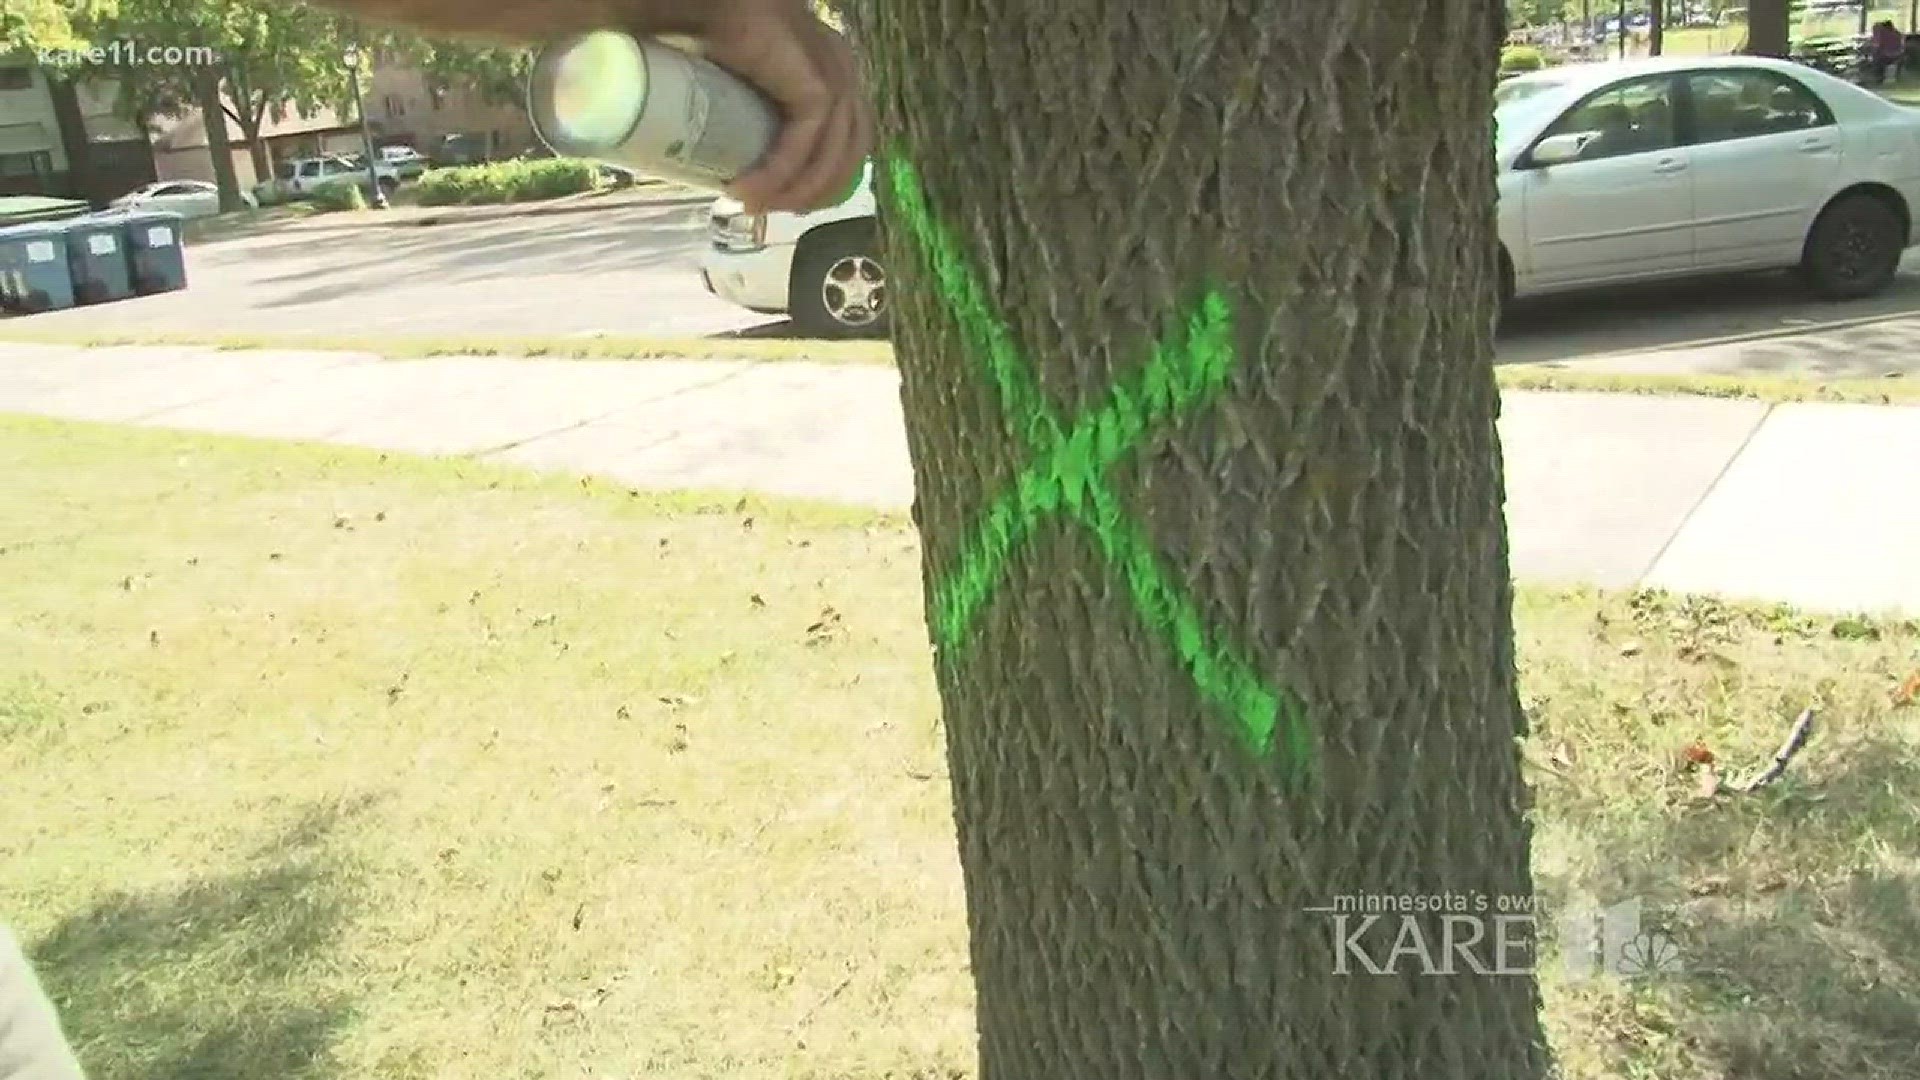 Officials believe the Emerald Ash Borer came to Minnesota in 2009, and as it spreads across the state, experts say almost all of our ash tree population is now considered to be critically endangered. http://kare11.tv/2lsNZau